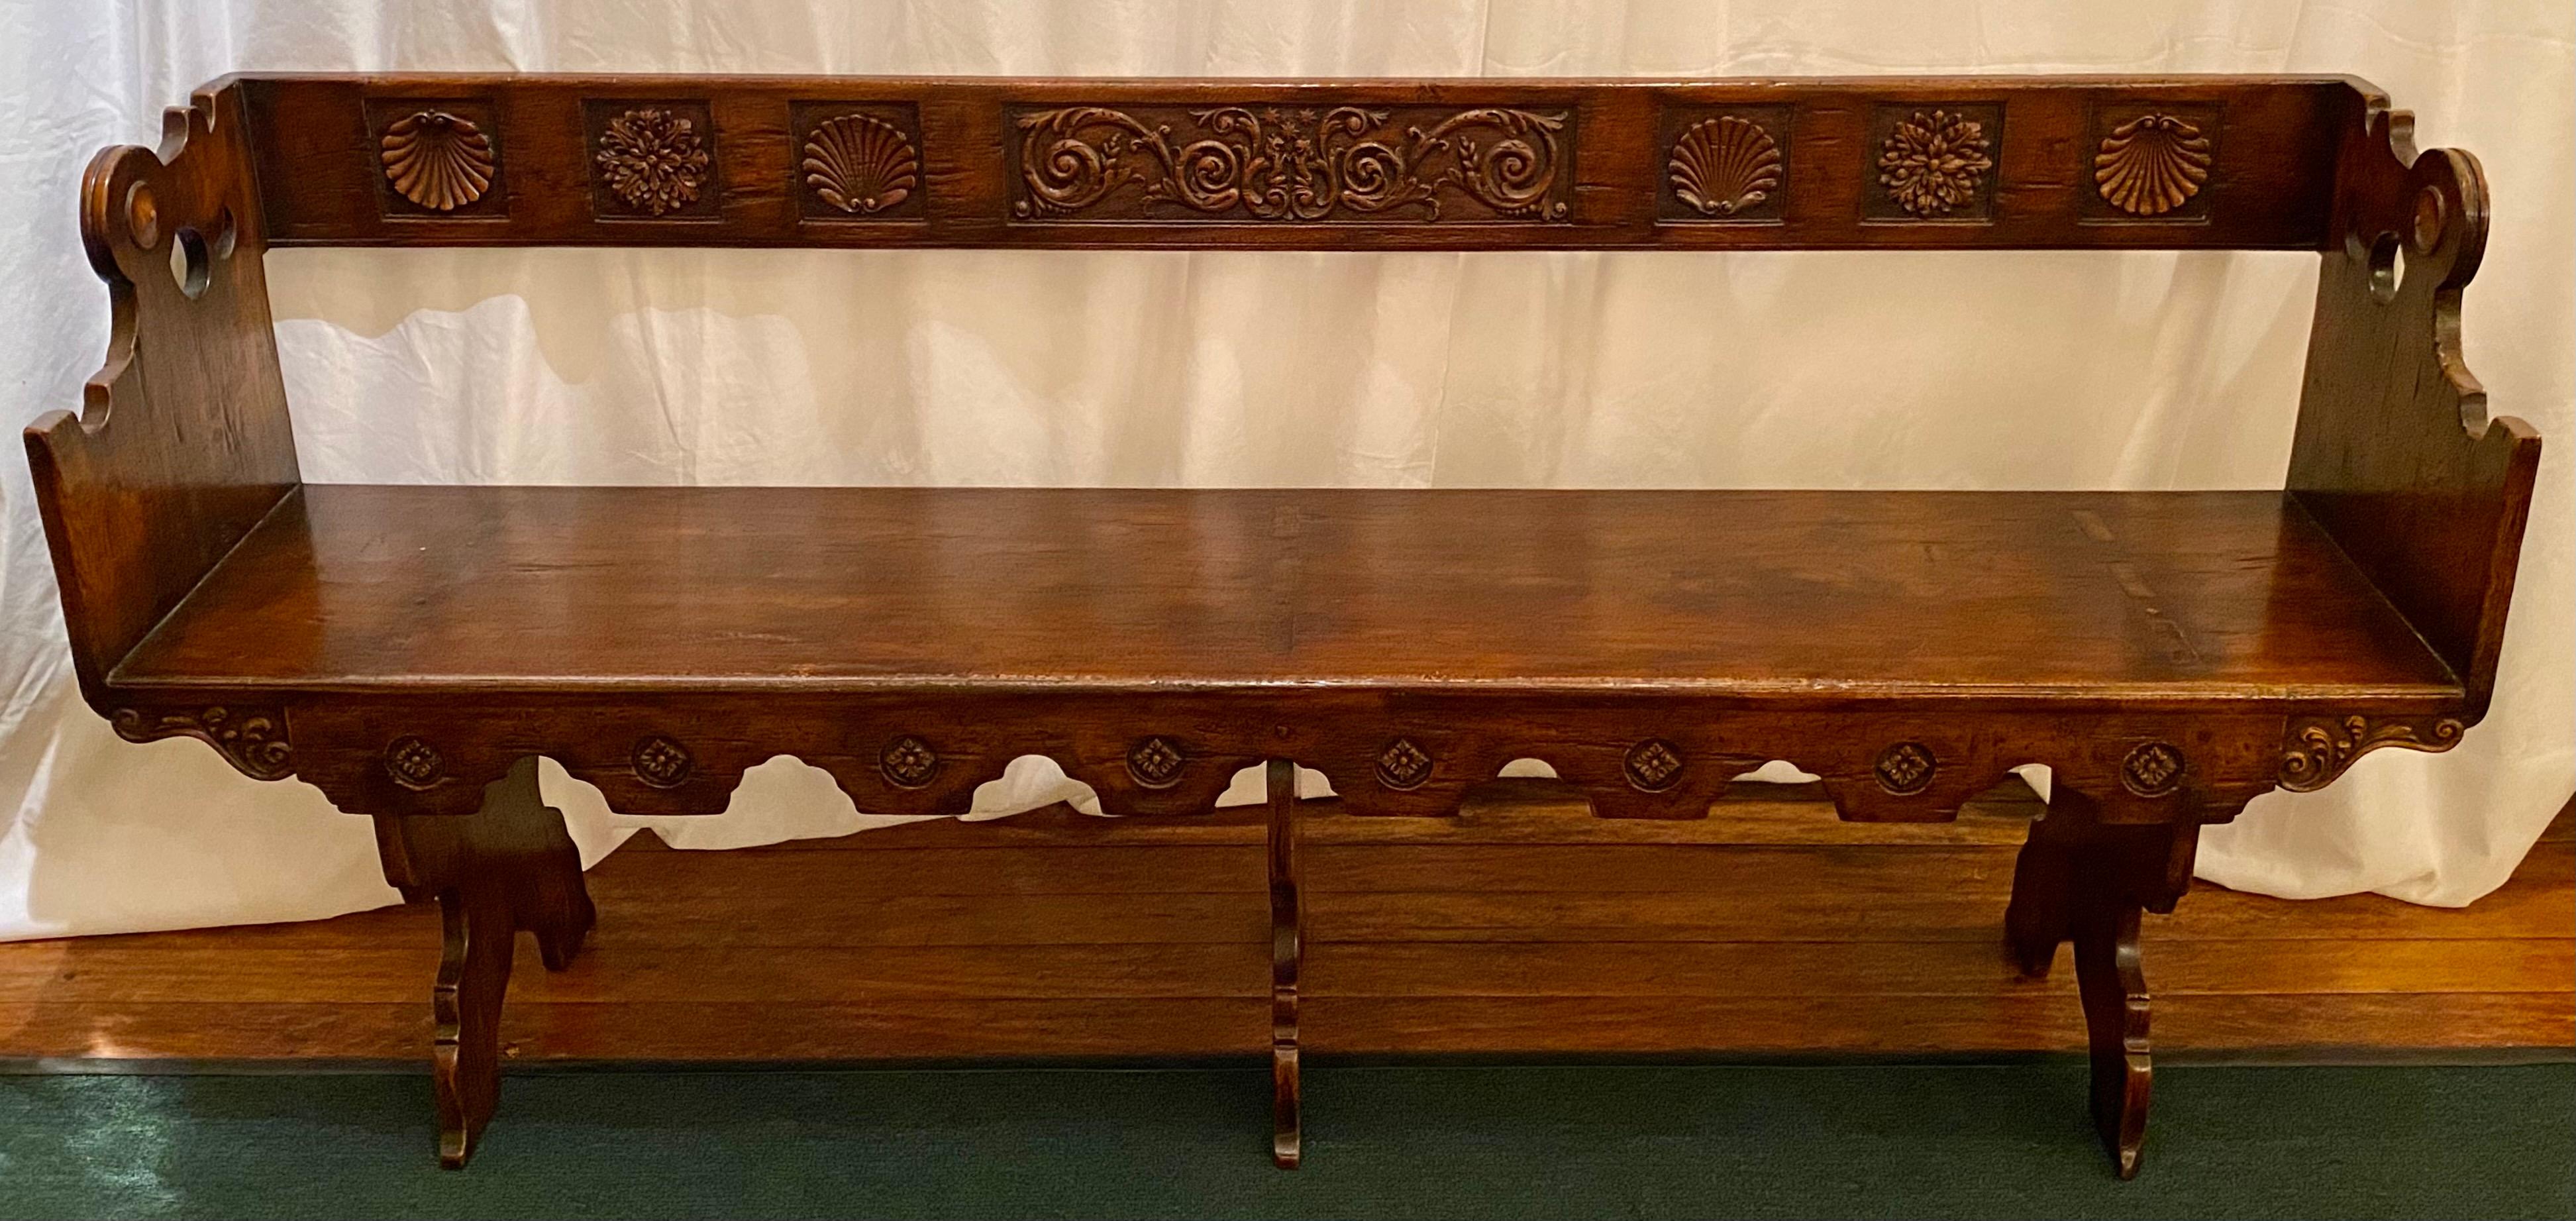 Antique 19th century French carved walnut banquette bench, circa 1880.